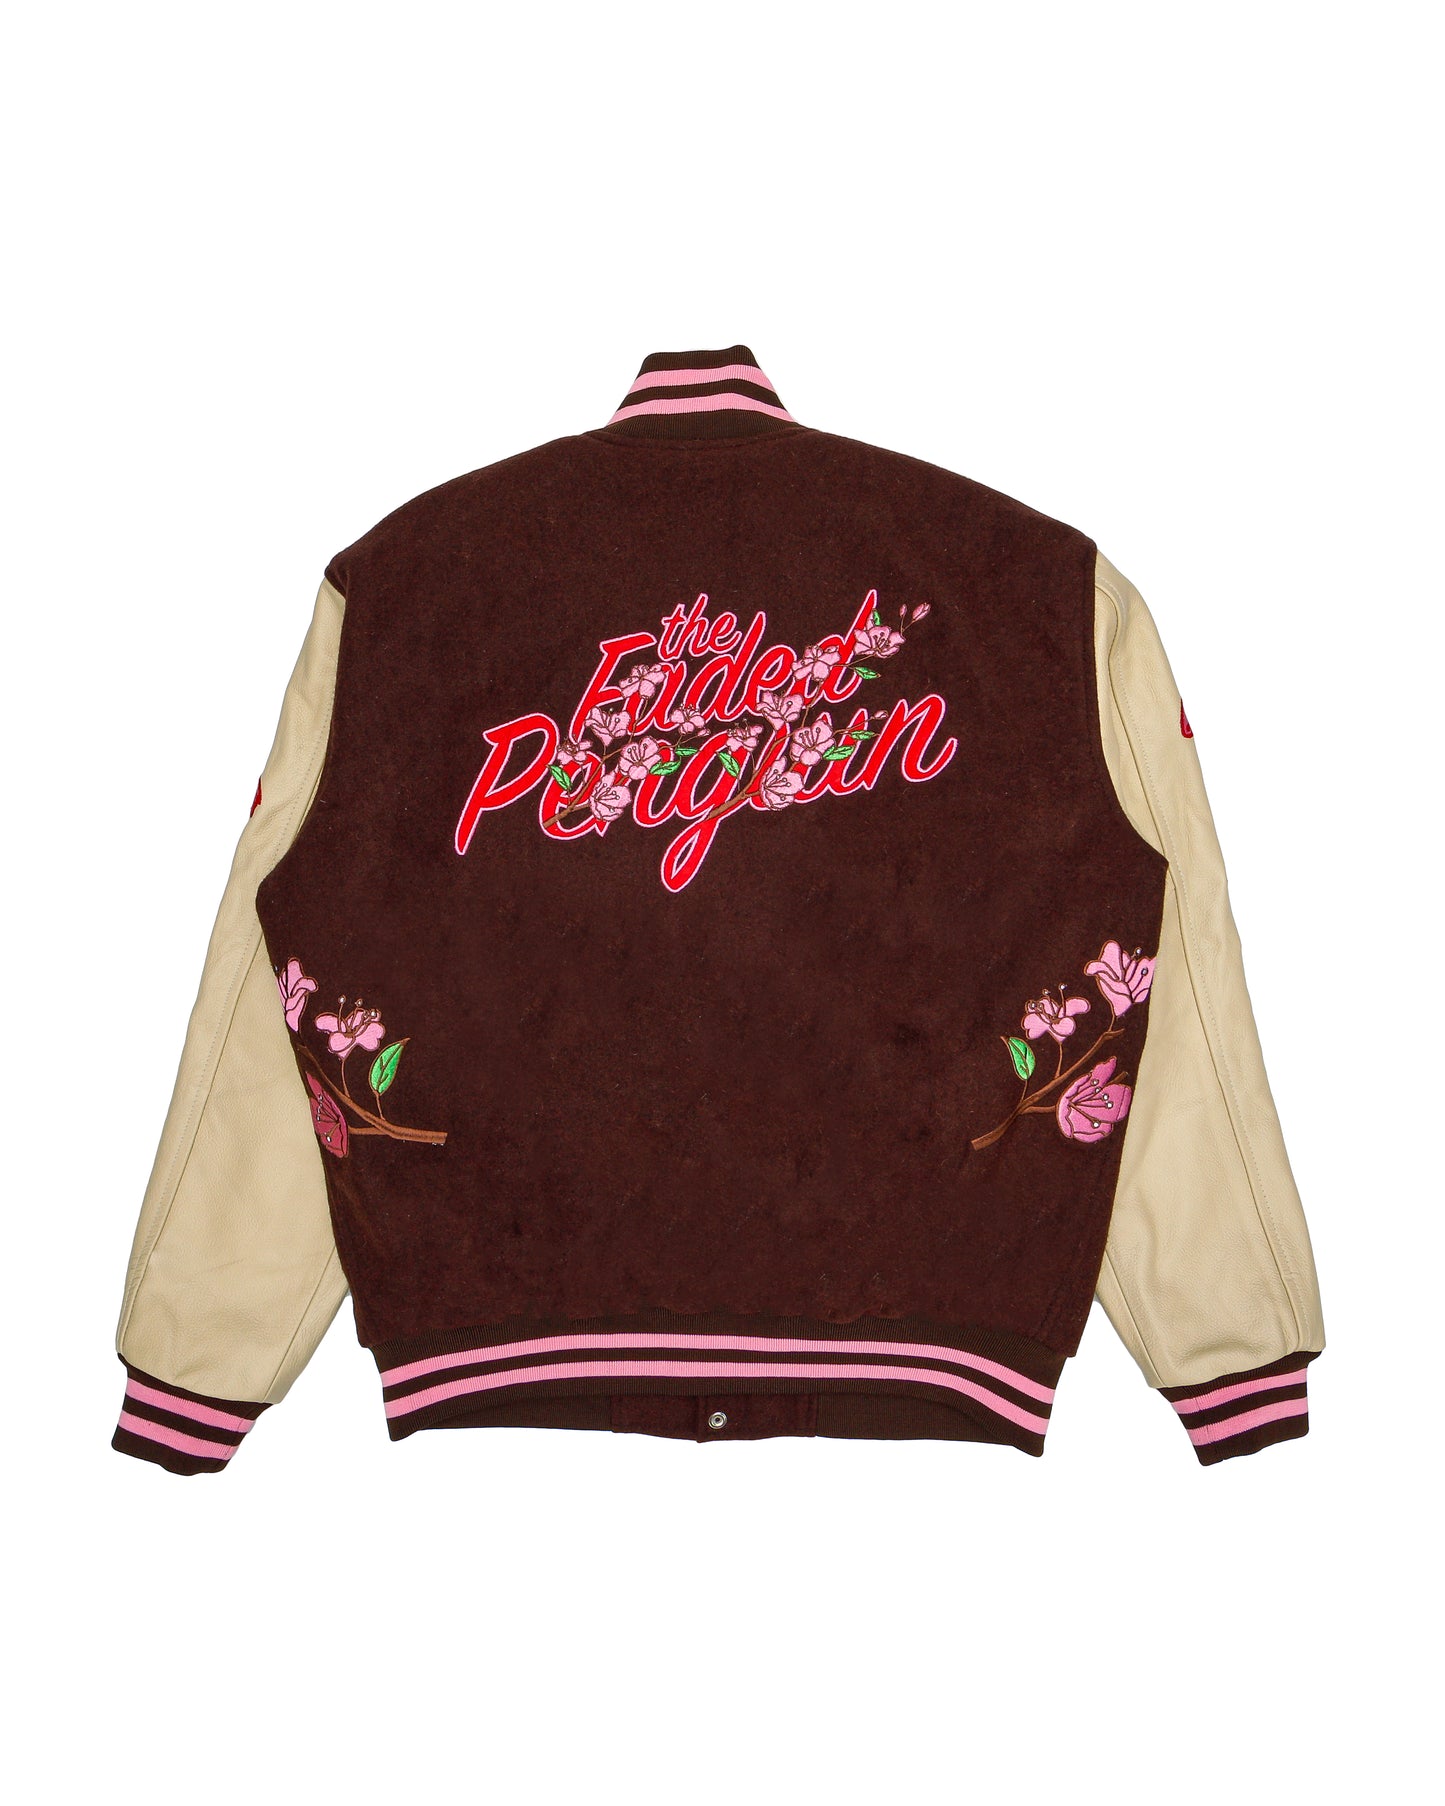 Cherry Blossom Letterman Jacket (Brown/Tan/Red)